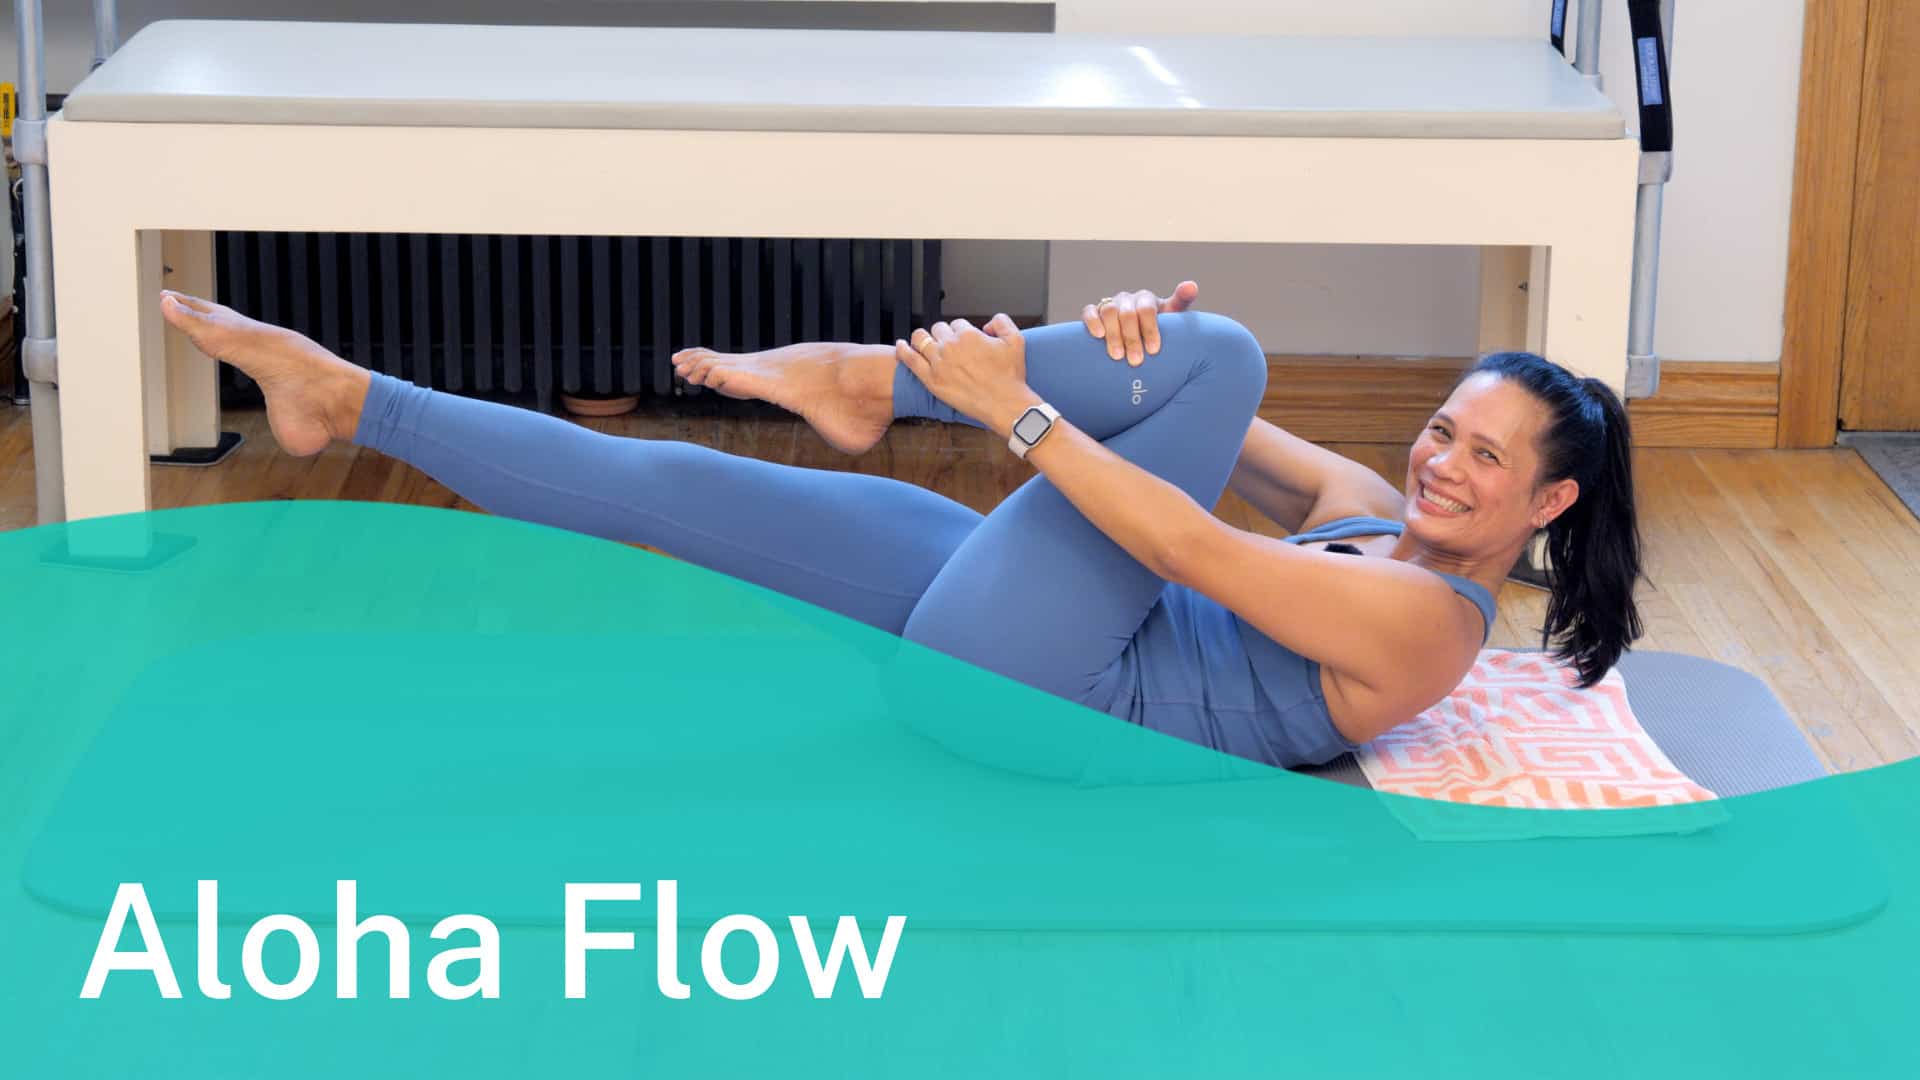 Pilates Flow Series Designed to Build Strength in the Low Abs